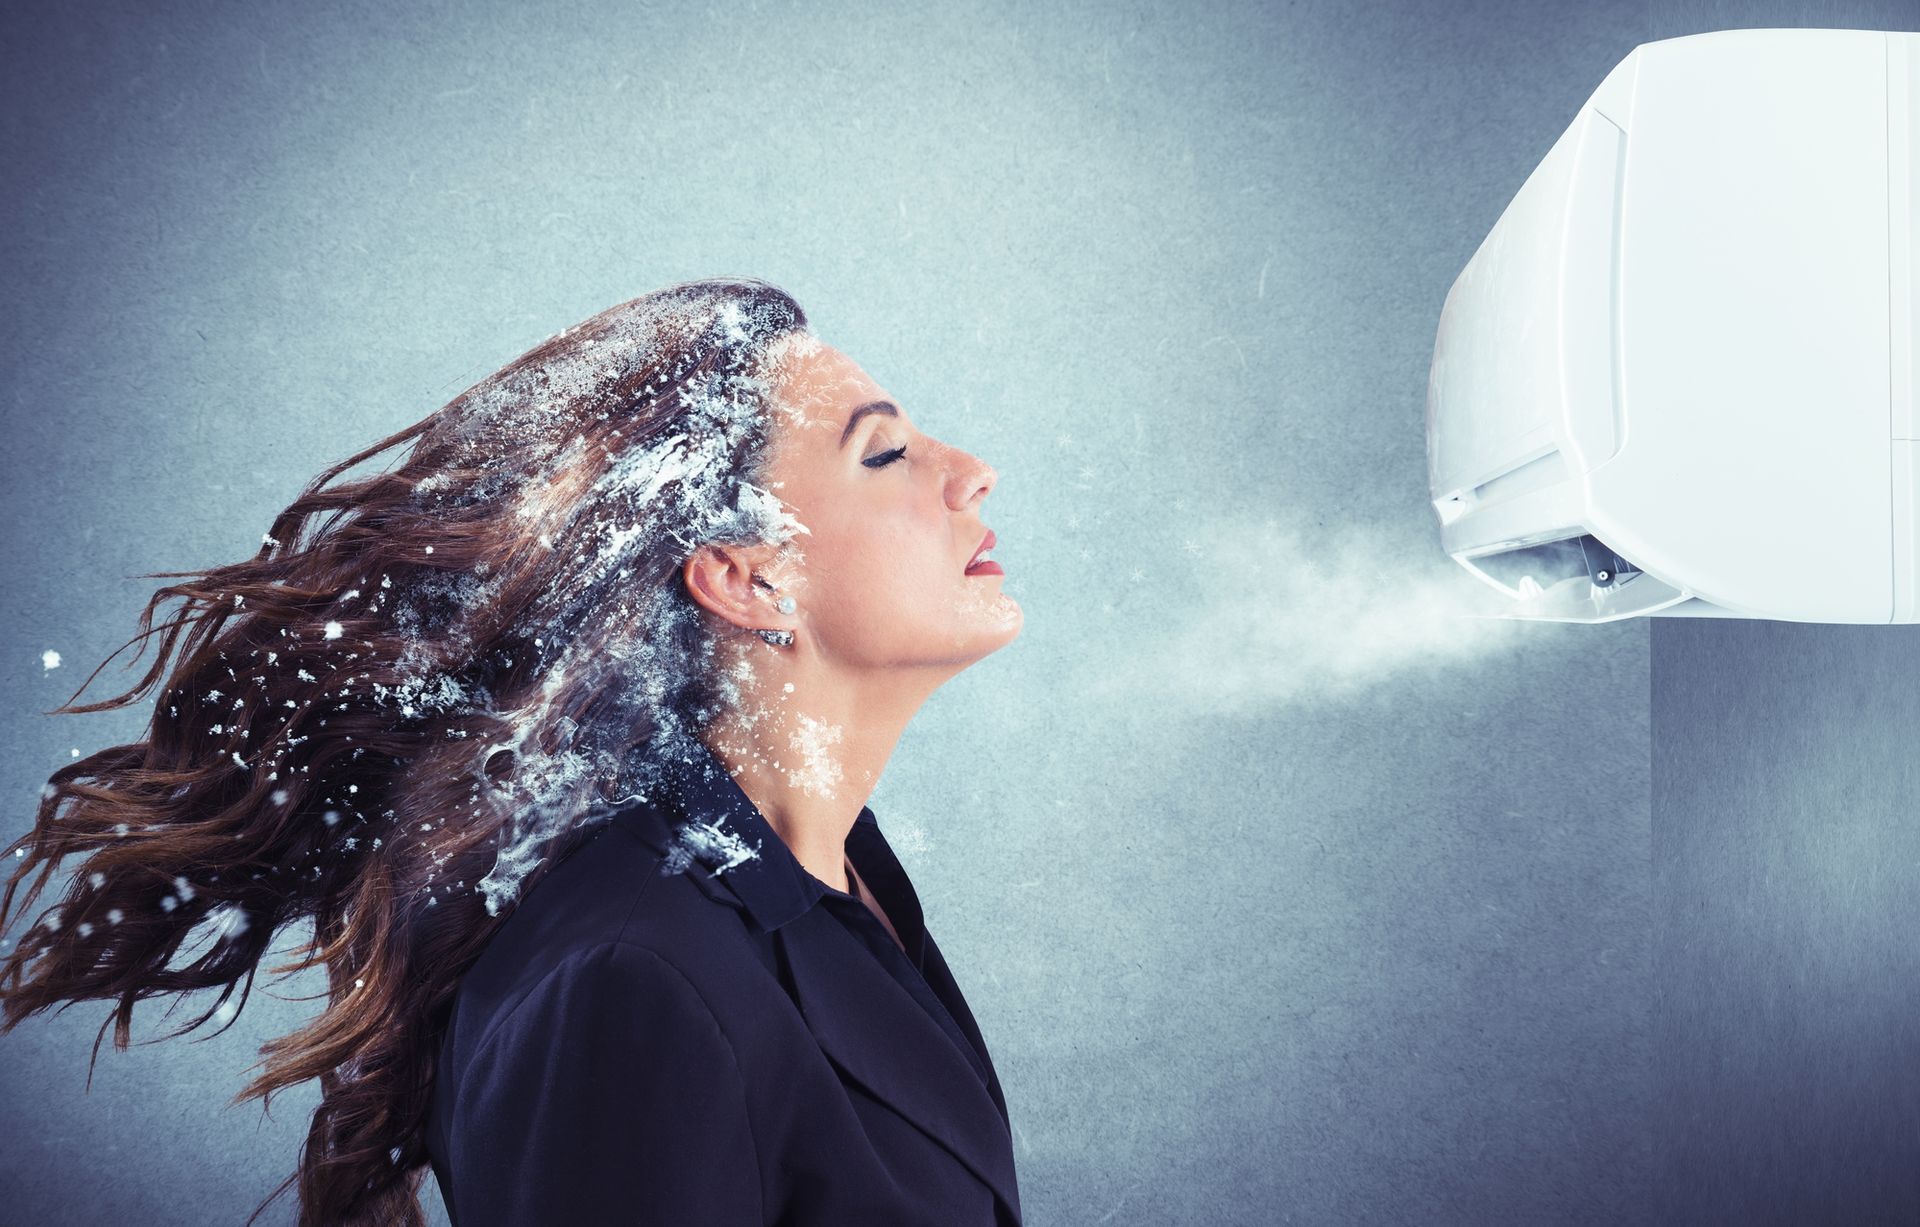 A woman is standing in front of an air conditioner with her hair blowing in the wind.